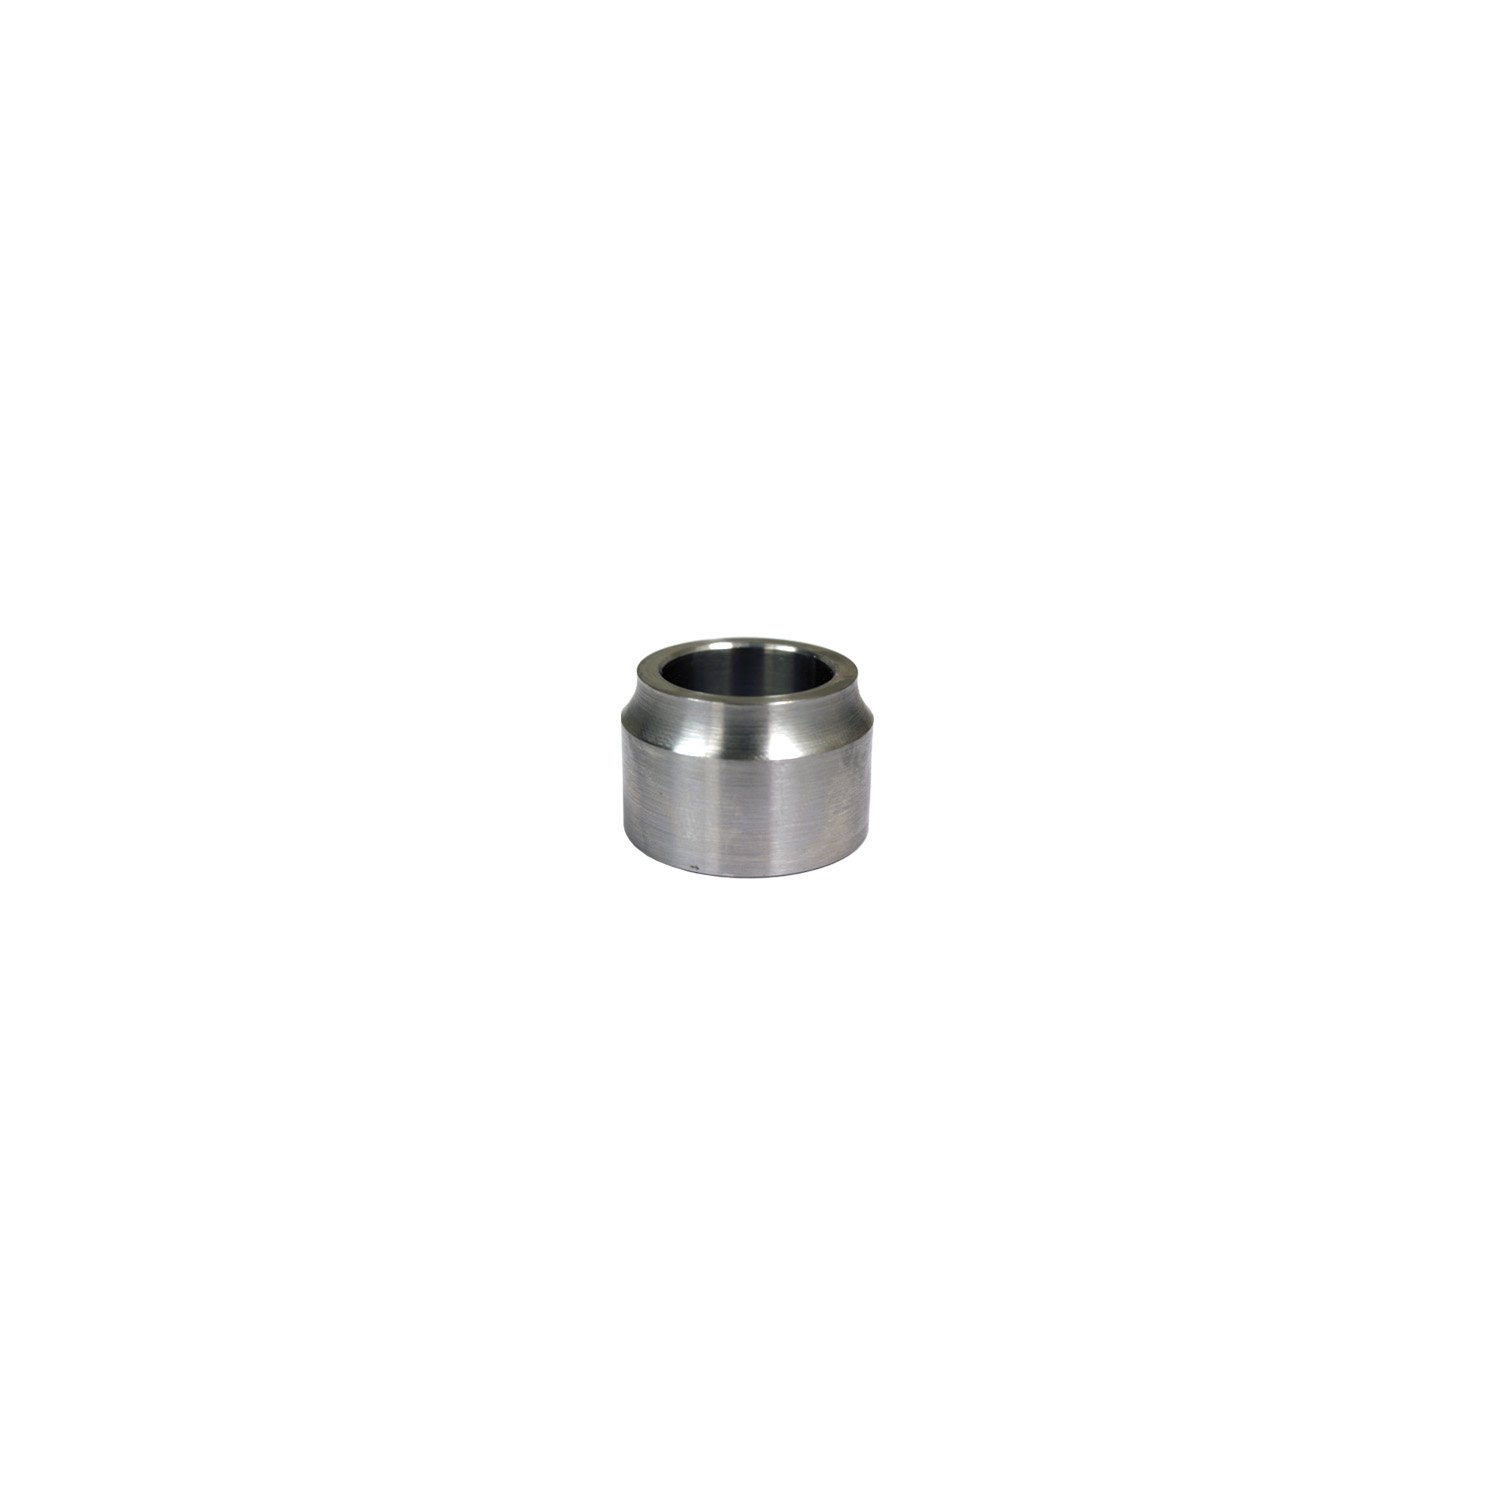 SPACER ROD END SS 3/4 X .750 LG